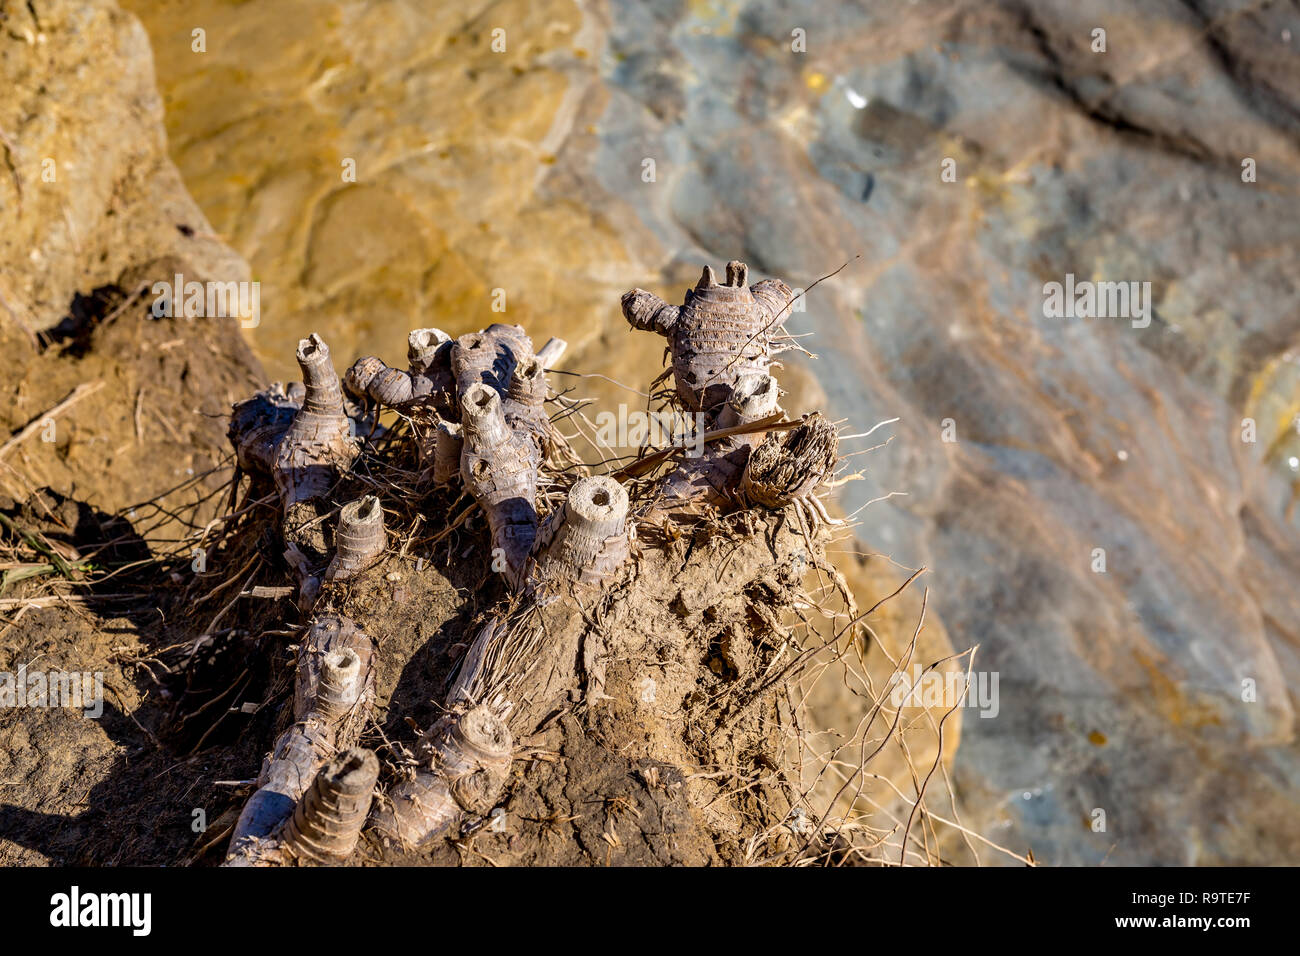 Page 3 - Wildlife Greece Corfu High Resolution Stock Photography and Images  - Alamy